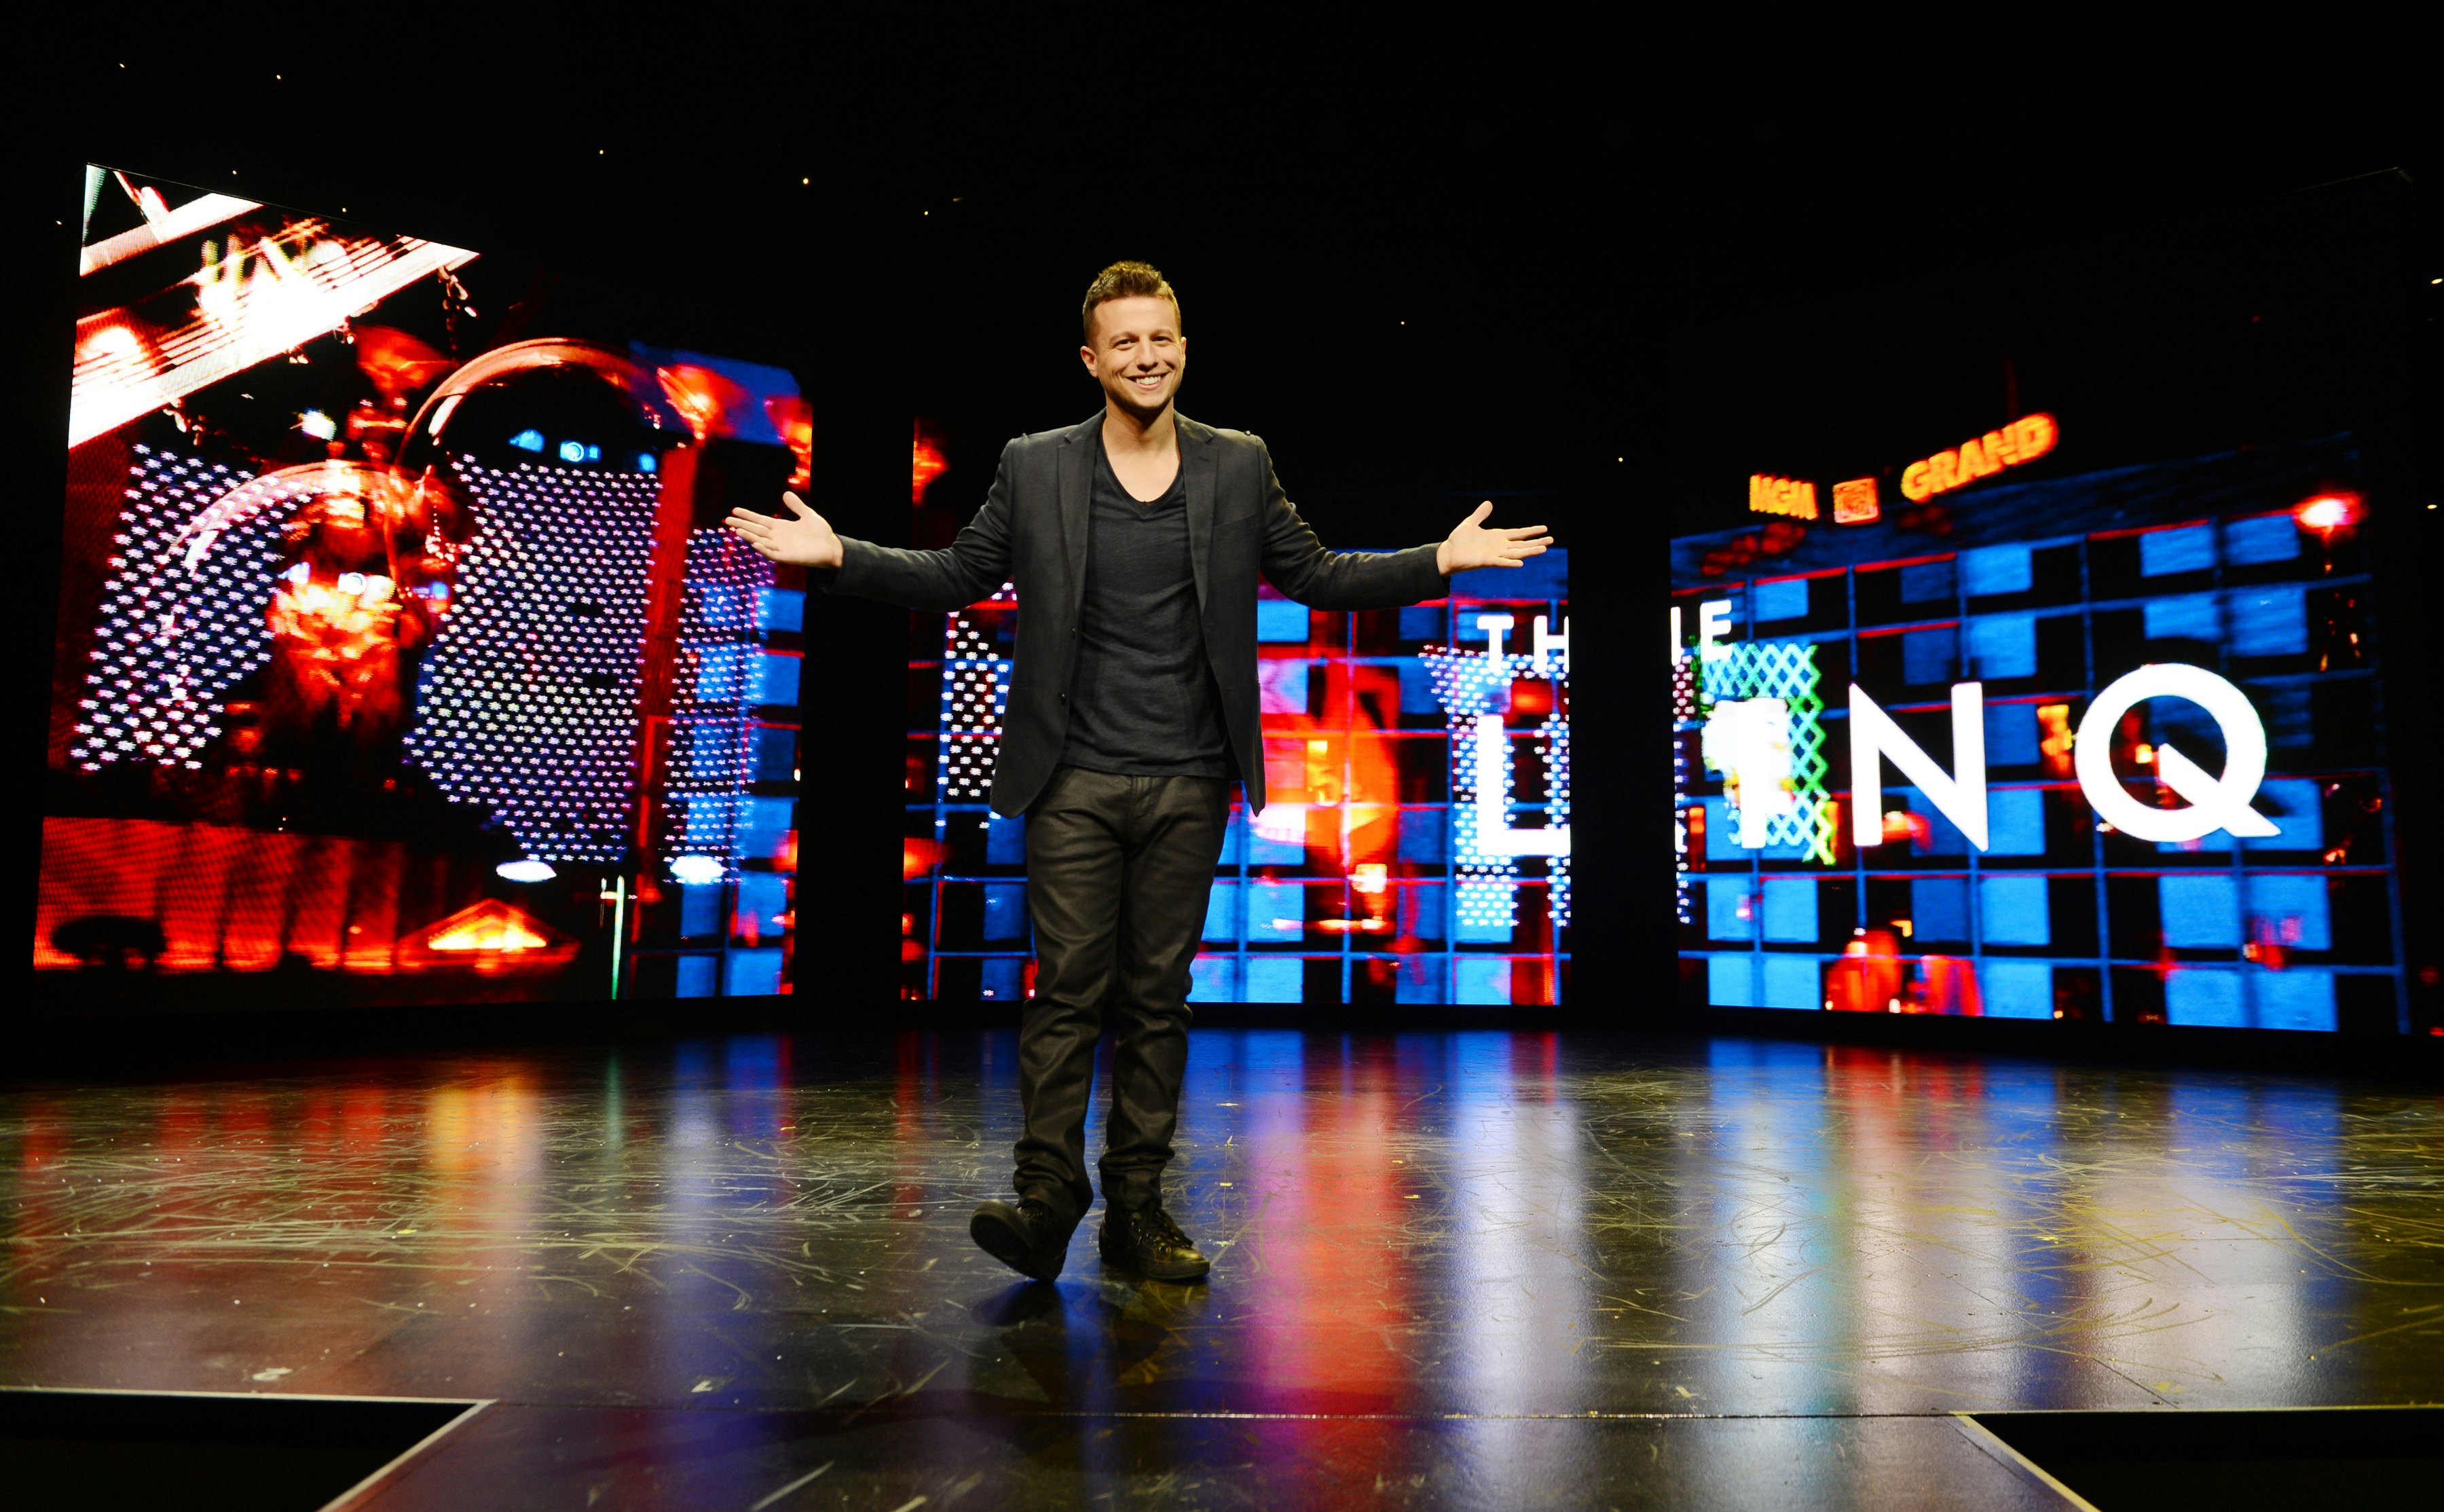 Magician Mat Franco, dressed all in black, stands on stage in Las Vegas, smiling and holding out his arms in a welcoming pose.